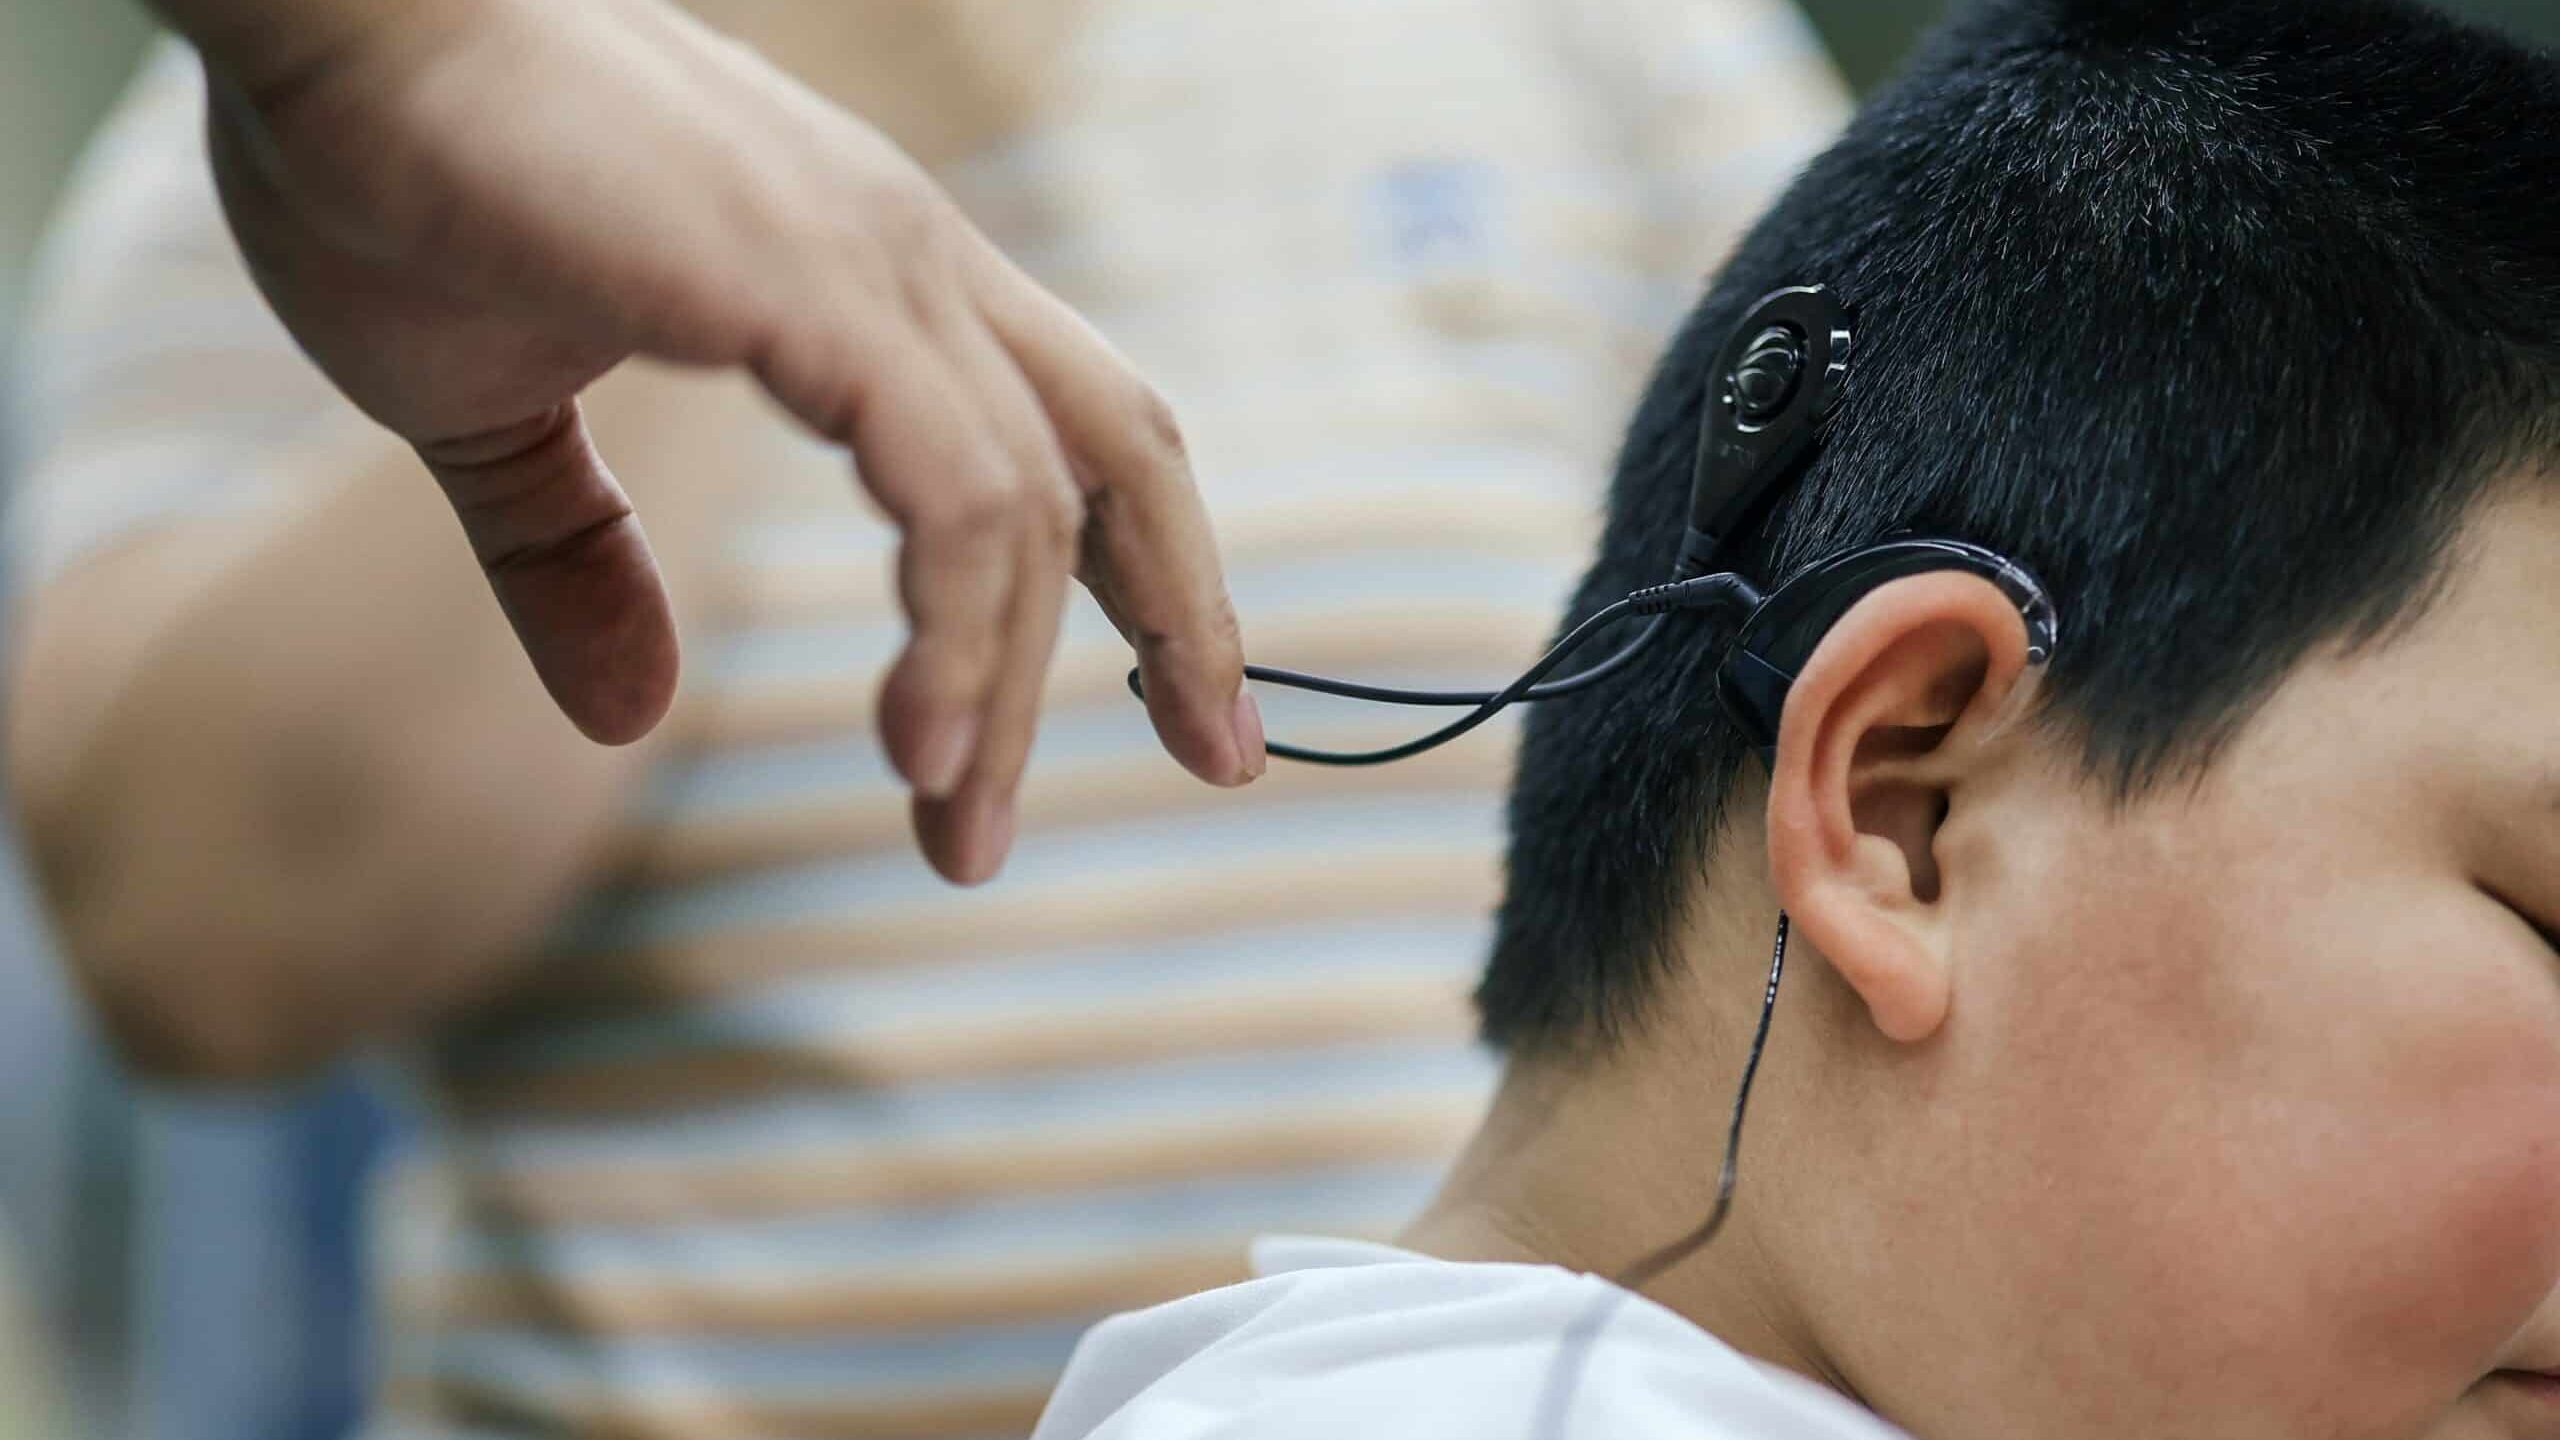 A staff member helps a child start up his cochlear implant for the first time in Changchun, northeast China's Jilin Province, May 15, 2023. In recent years, Jilin Province has continued to improve the policy of rehabilitation and treatment for hearing-impaired children, and has provided free cochlear implant operations for more than 1,000 children.